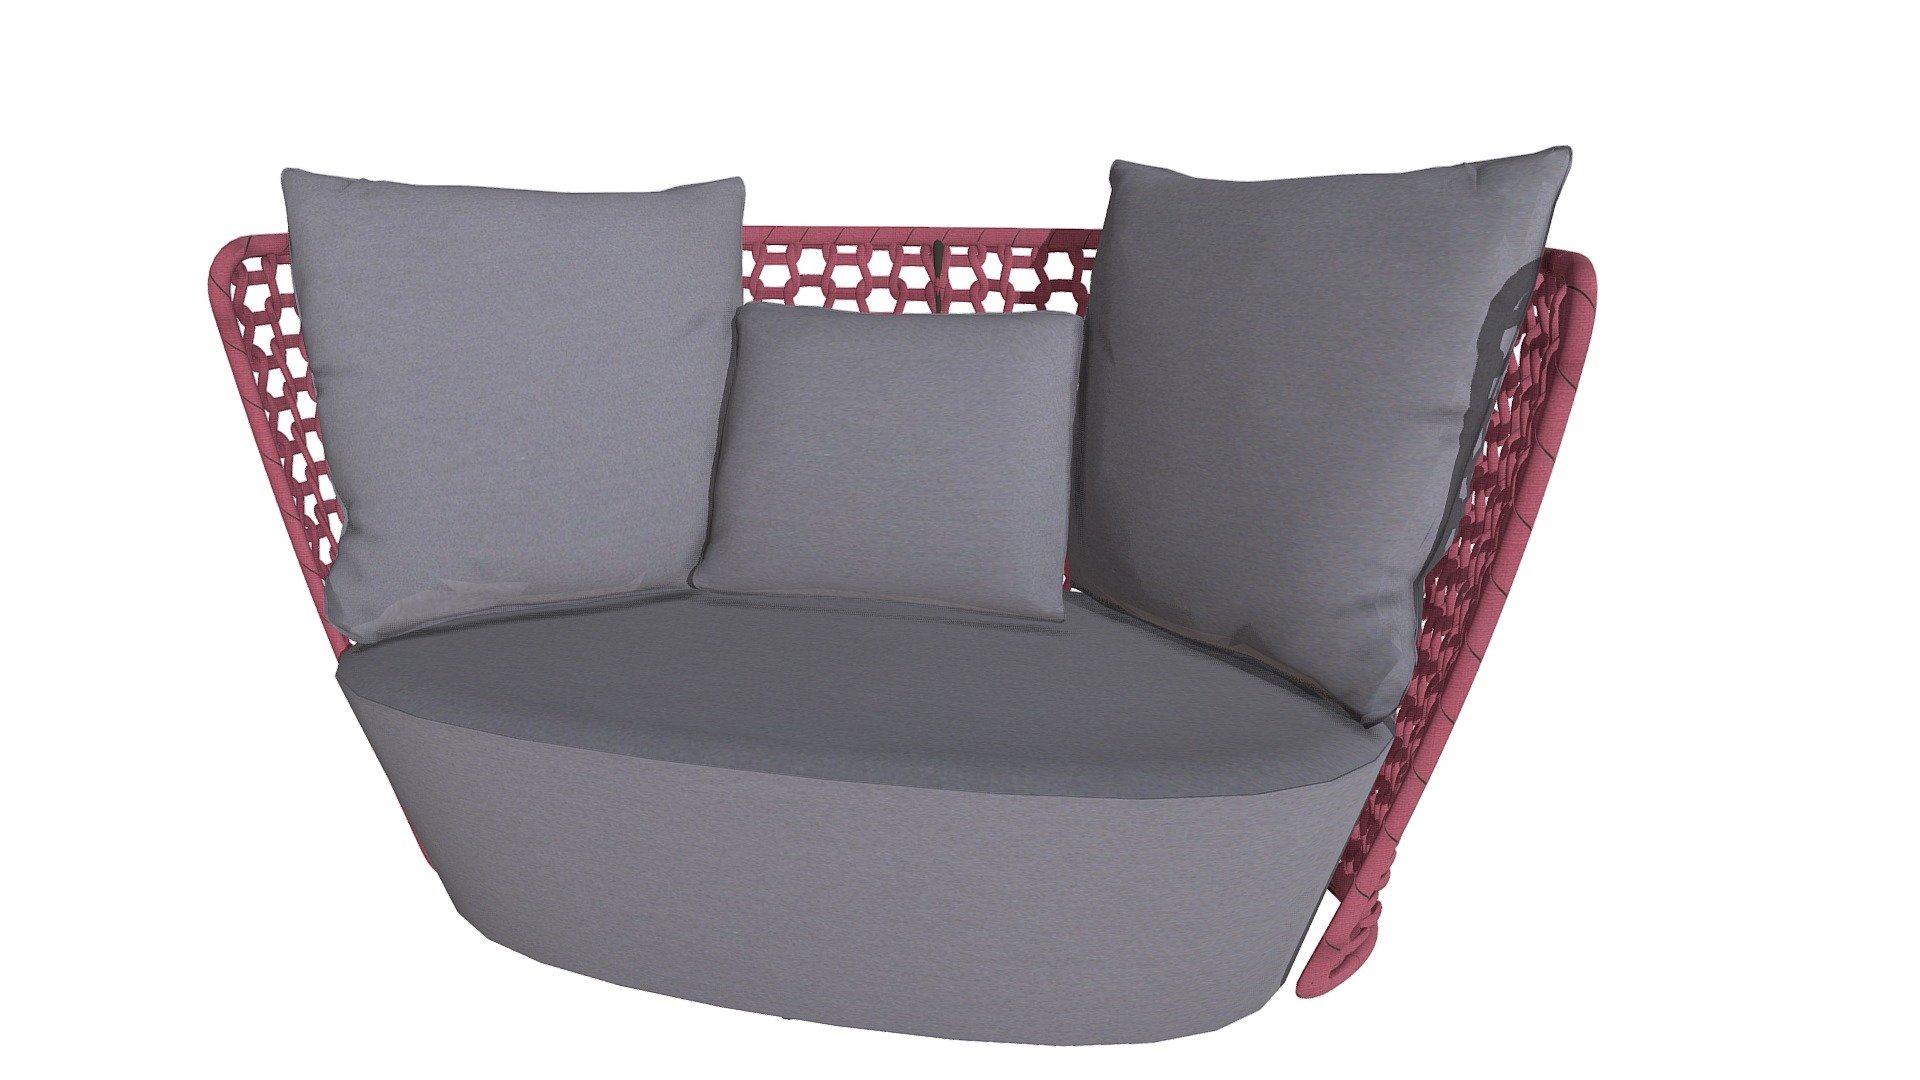 The Faye Beach Sofa is made from industry leader Sunproof fabric and an aluminum frame.  The intricate lattice patter neatly juxtaposes with the thick and comfy cushions of the seat and back.  This piece is wonderfully modern with many architectural beauty cues. www.zuomod.com/faye-bay-beach-sofa-cranberry-gray - Faye Bay Beach Sofa Cranberry & Gray - 703587 - Buy Royalty Free 3D model by Zuo Modern (@zuo) 3d model